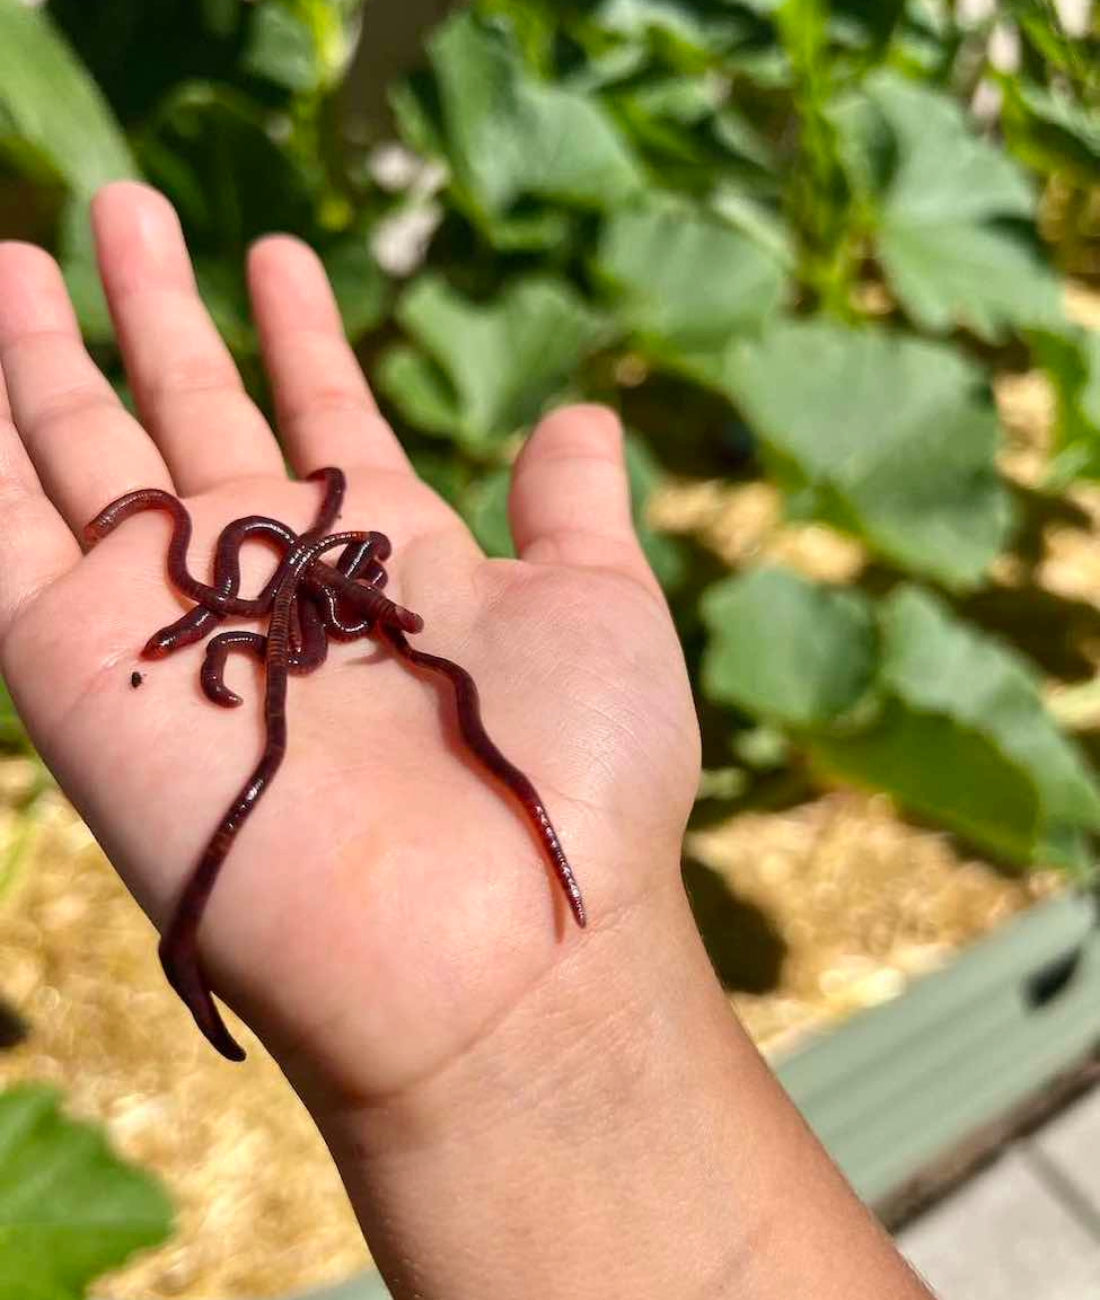 Red Wiggler worms in a persons hand.